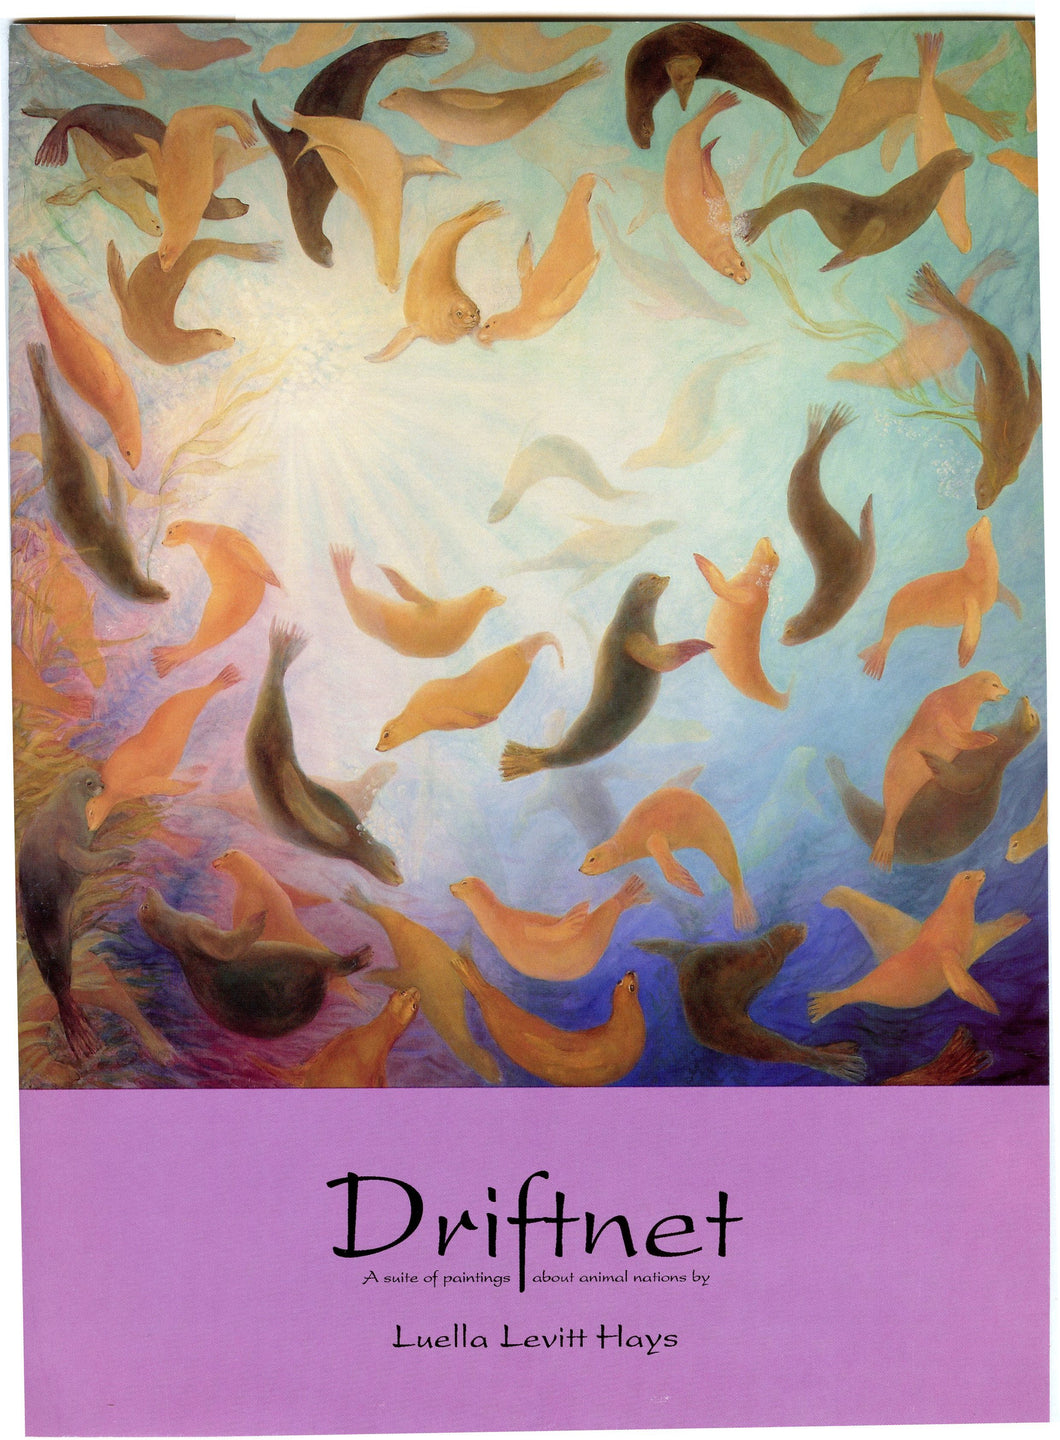 Driftnet: A suite of paintings about animal nations by Luella Levitt Hays